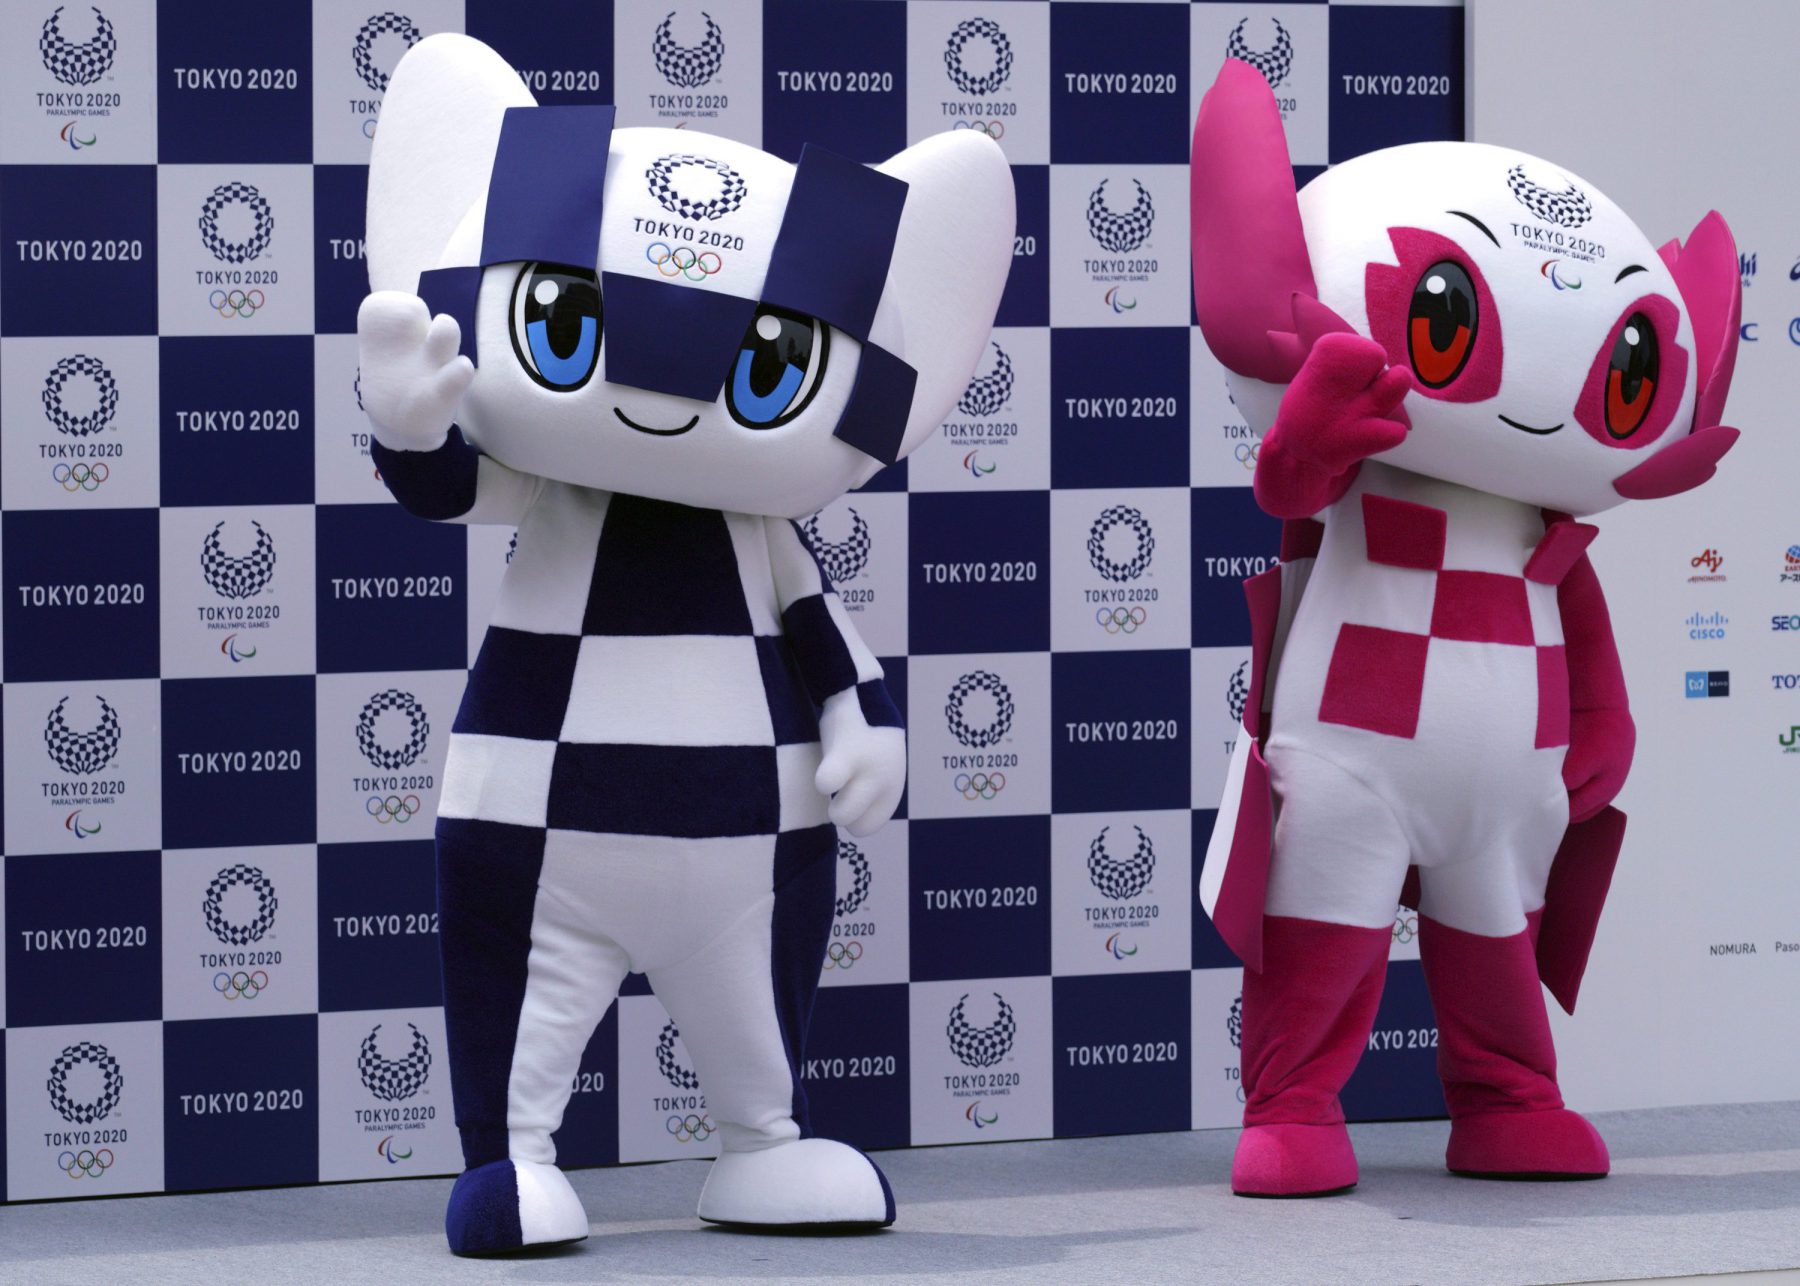 Tokyo 2020 Olympic mascot "Miraitowa", left, and Paralympic mascot "Someity", right, pose for photographers during the mascot debut event in Tokyo Sunday, July 22, 2018. The official mascots for the Tokyo 2020 Olympics and Paralympics were unveiled at a ceremony on Sunday. The two mascot designs were selected by elementary schoolchildren across Japan. (AP Photo/Eugene Hoshiko)